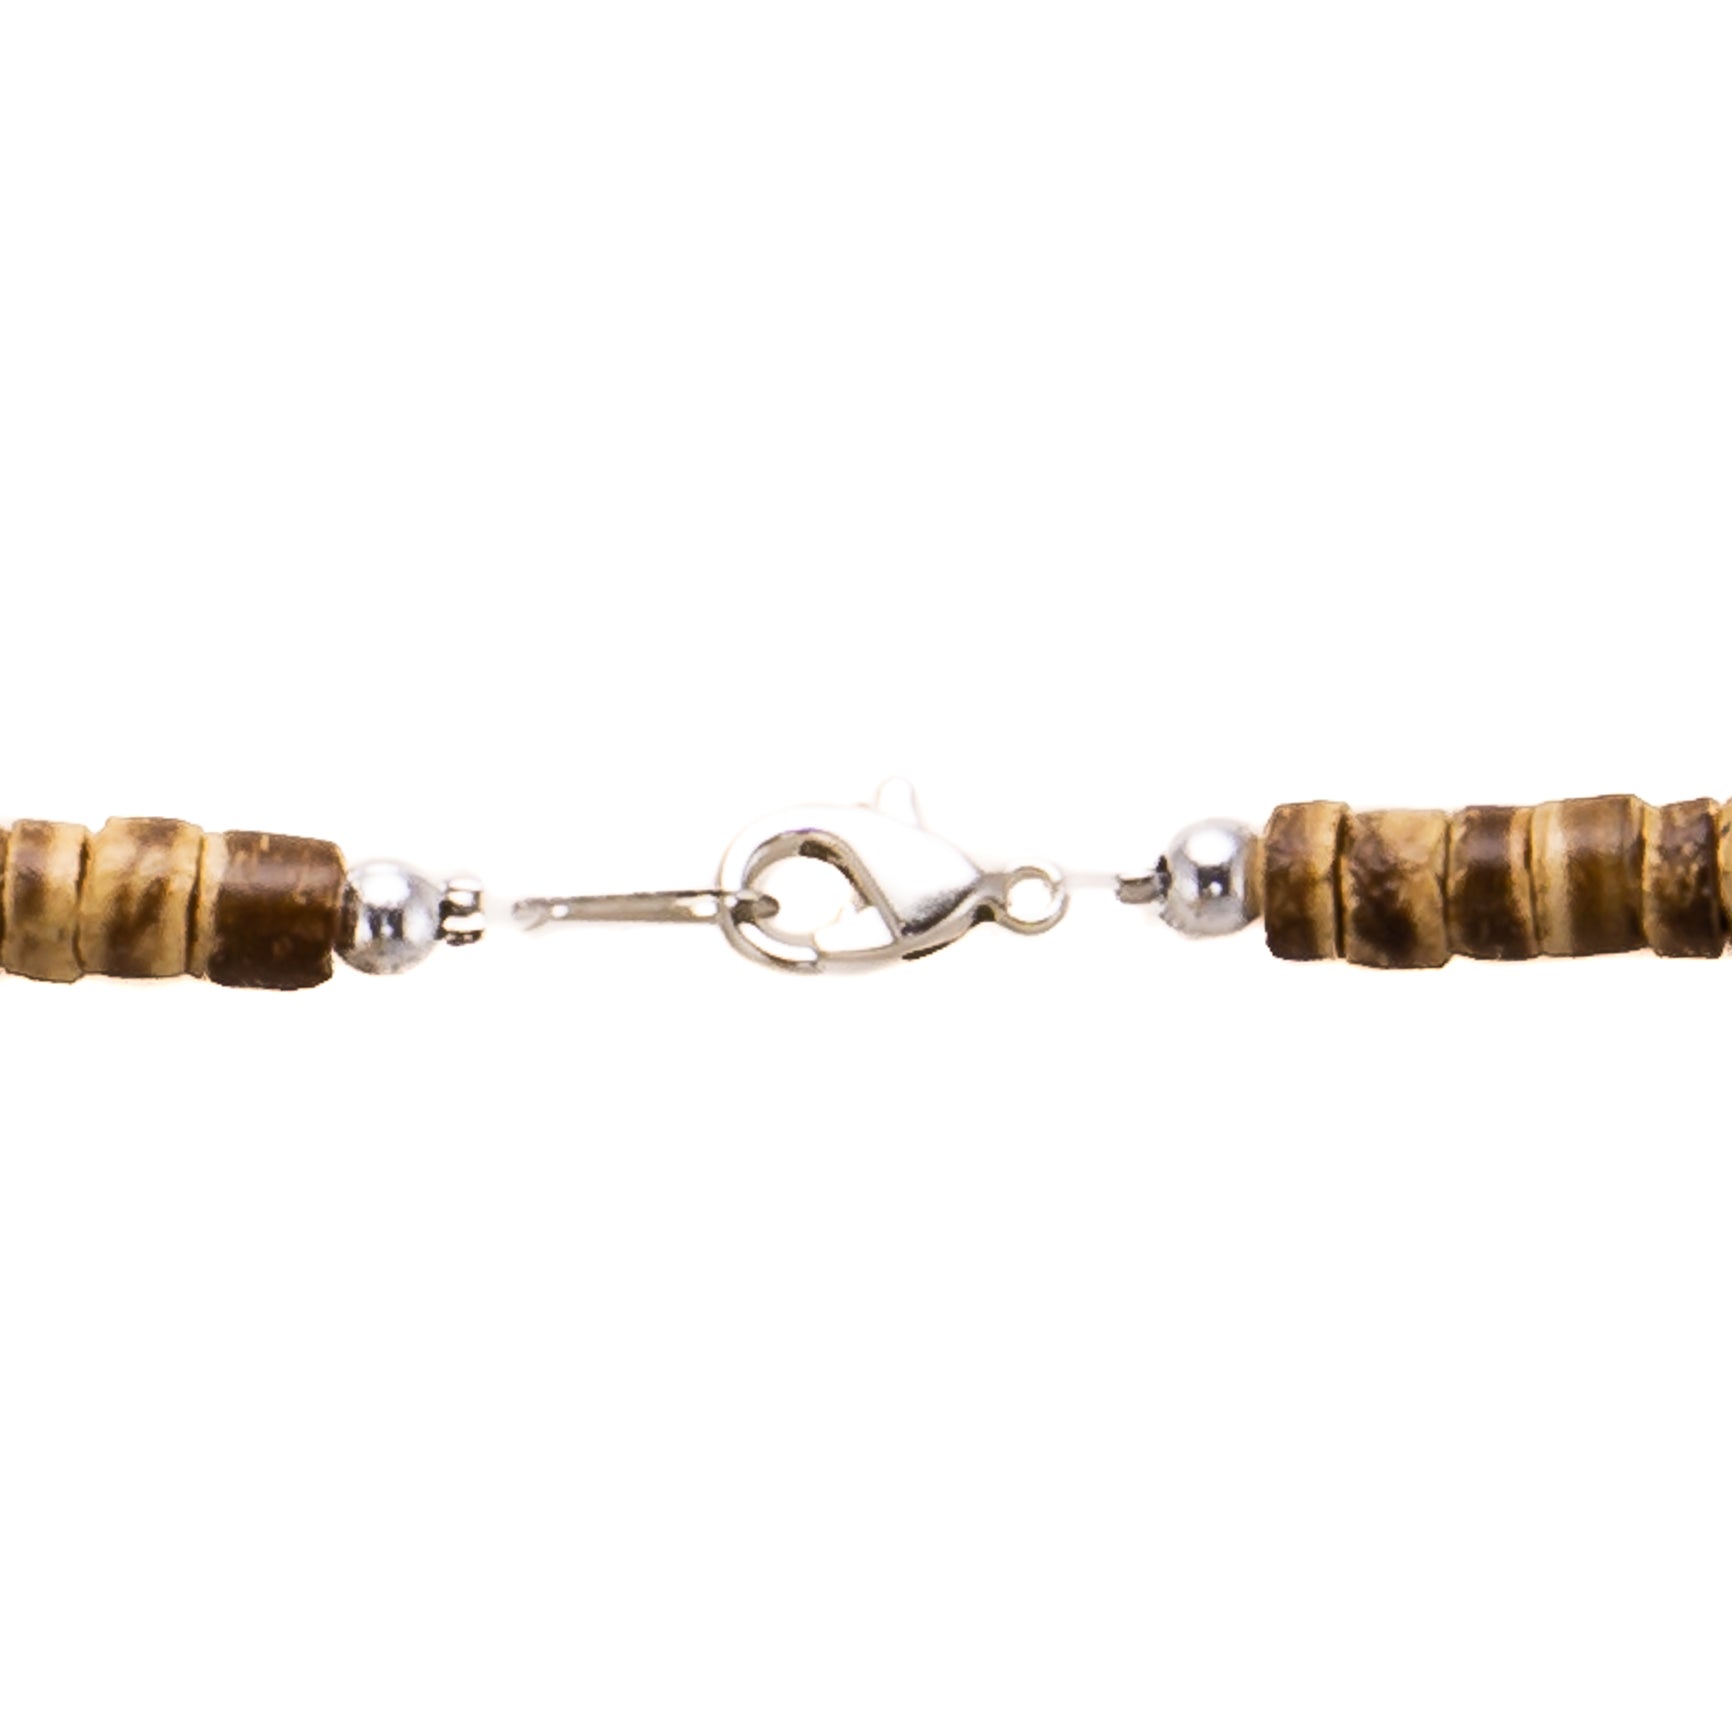 1"+ Shark Tooth Pendant on Tiger Coconut and Puka Shell Beads Necklace